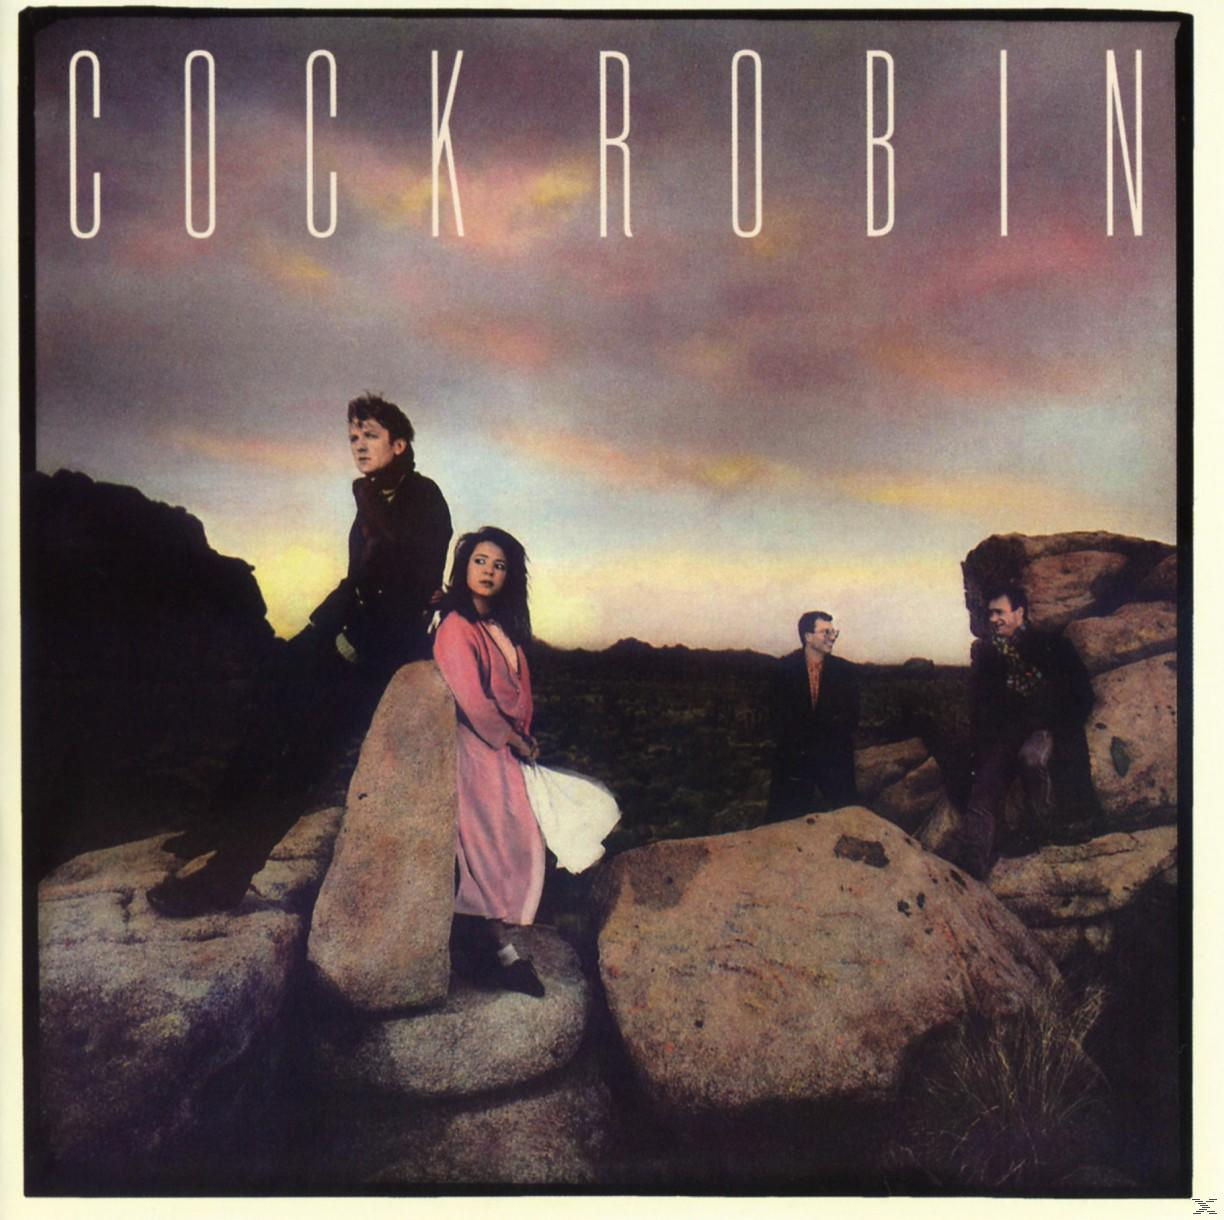 Cock Robin - Cock Robin (Remastered+Expanded (CD) - Edition)